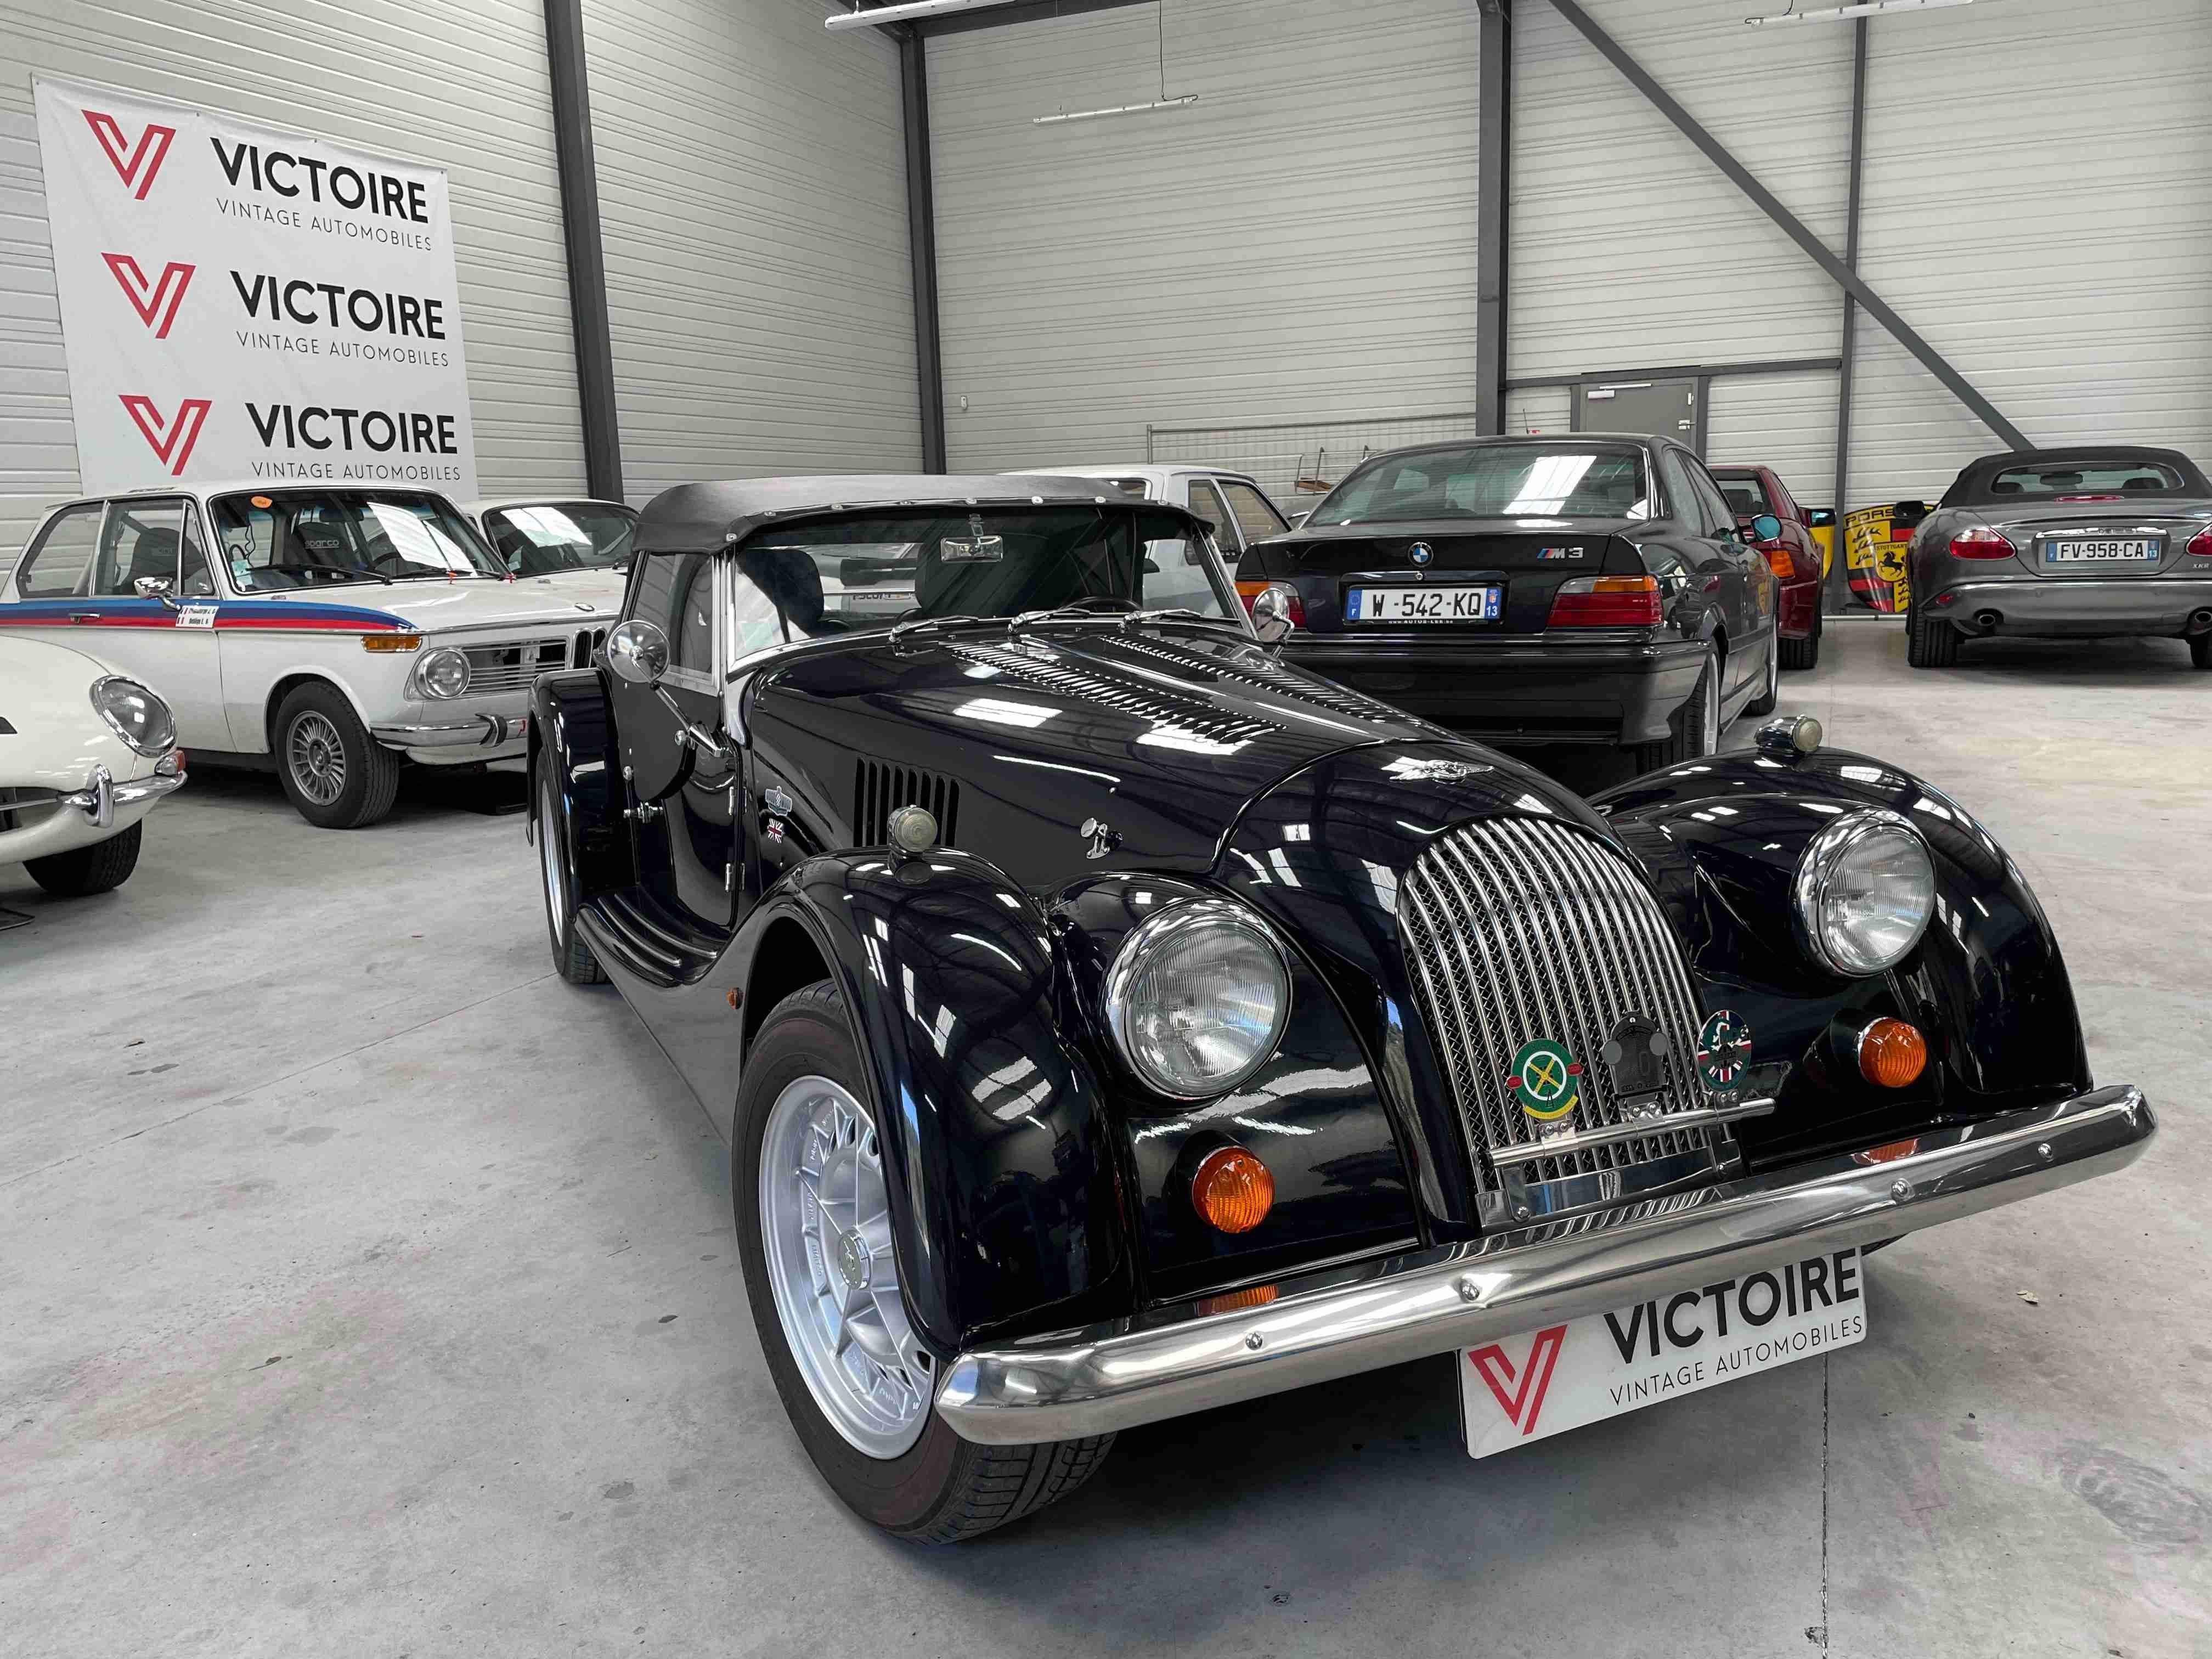 Morgan Roadster Convertible in Blue used in Chateauneuf le Roug for € 56,900.-